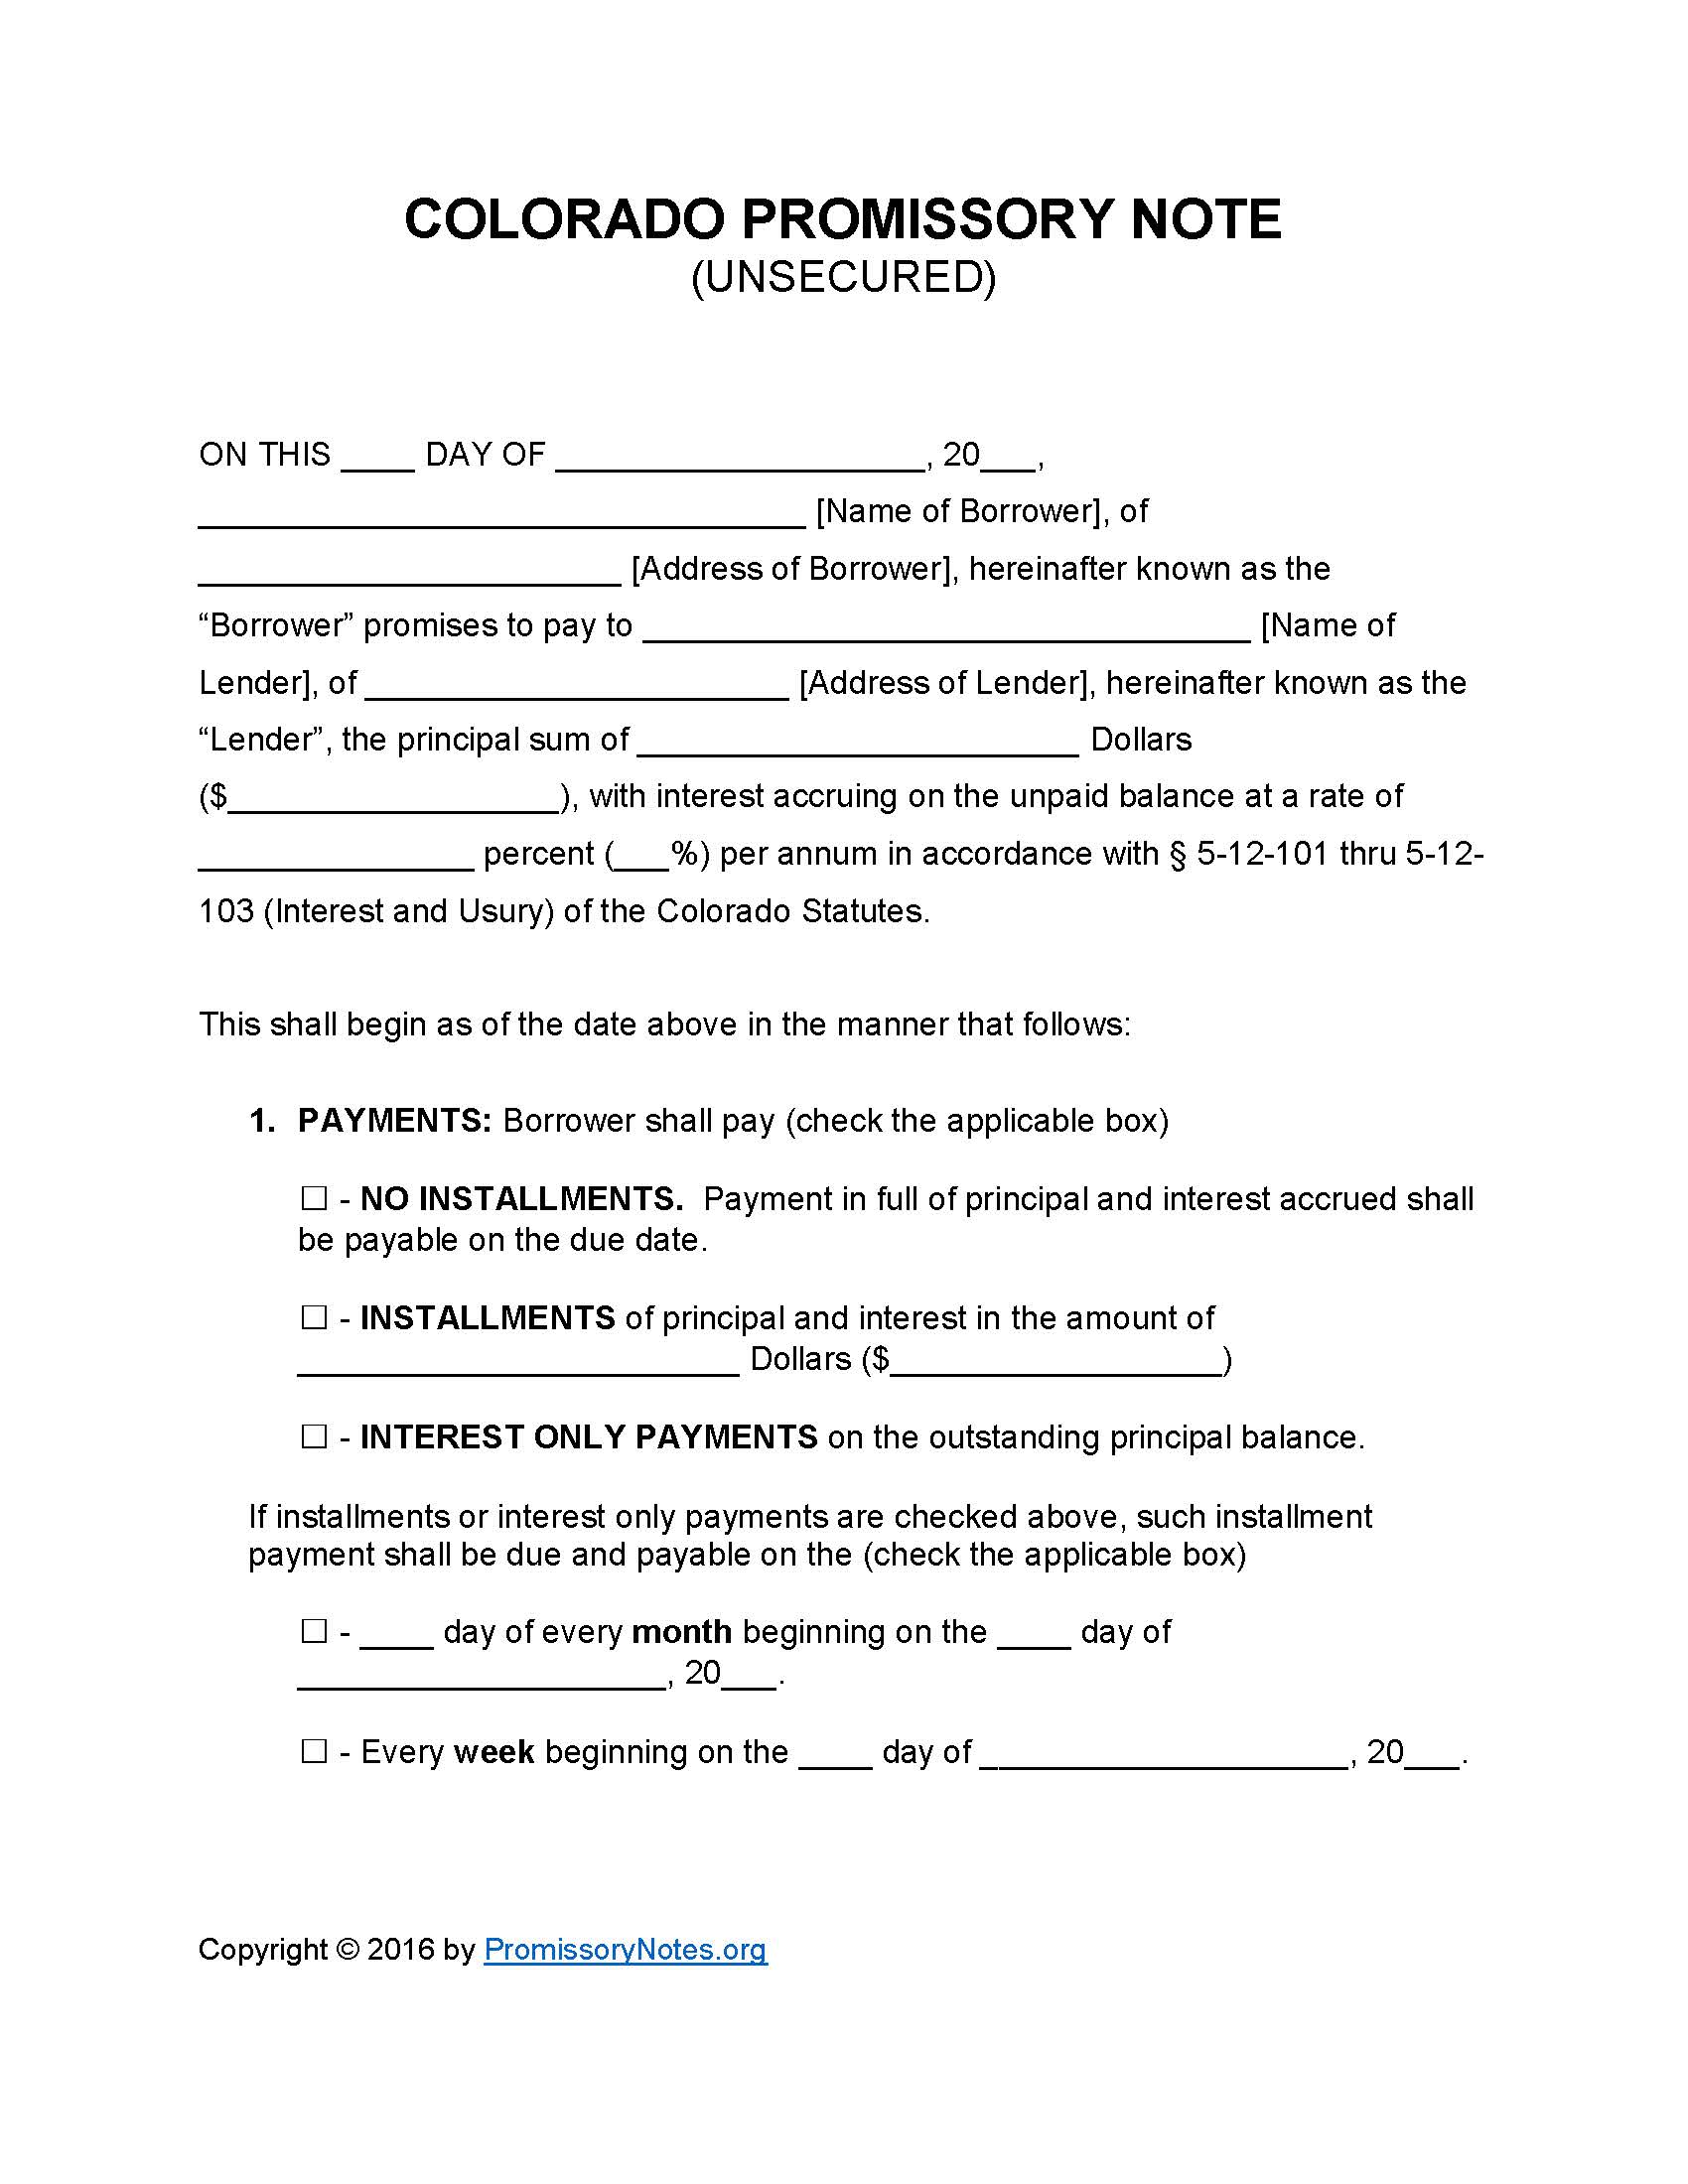 colorado-unsecured-promissory-note-form